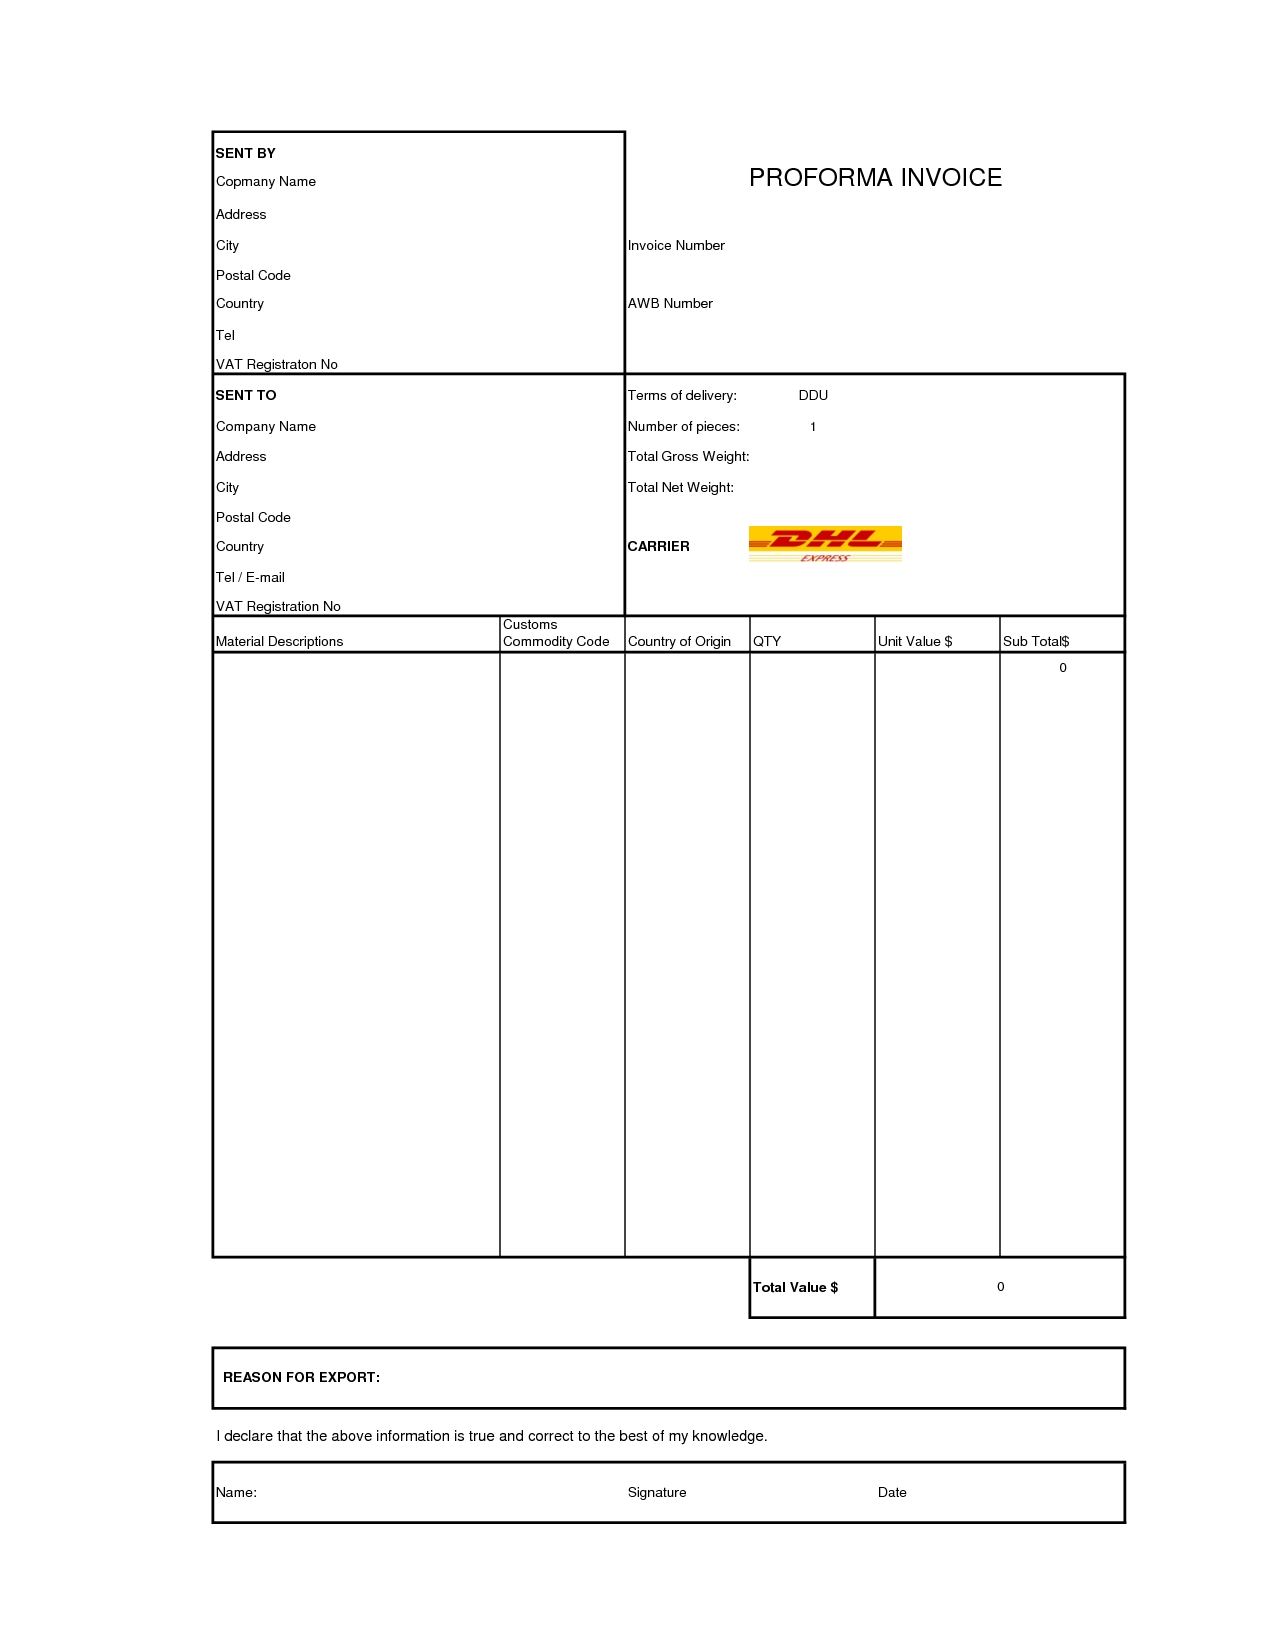 real estate business products dhl proforma invoice template